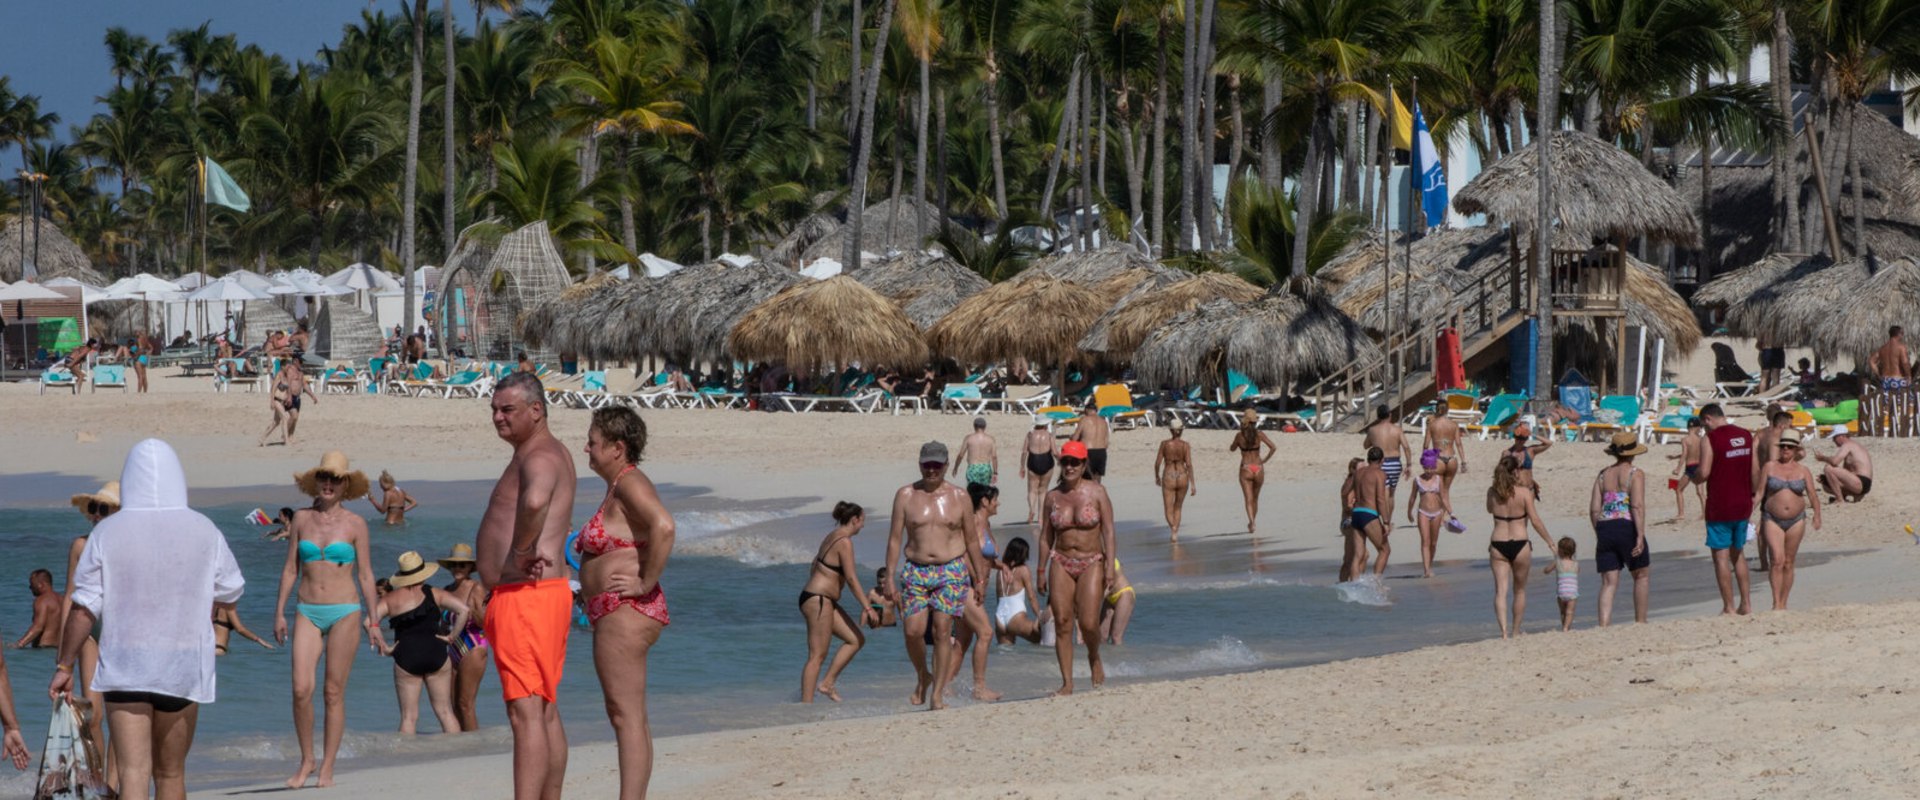 Can You Travel to Punta Cana Right Now During the COVID-19 Pandemic?